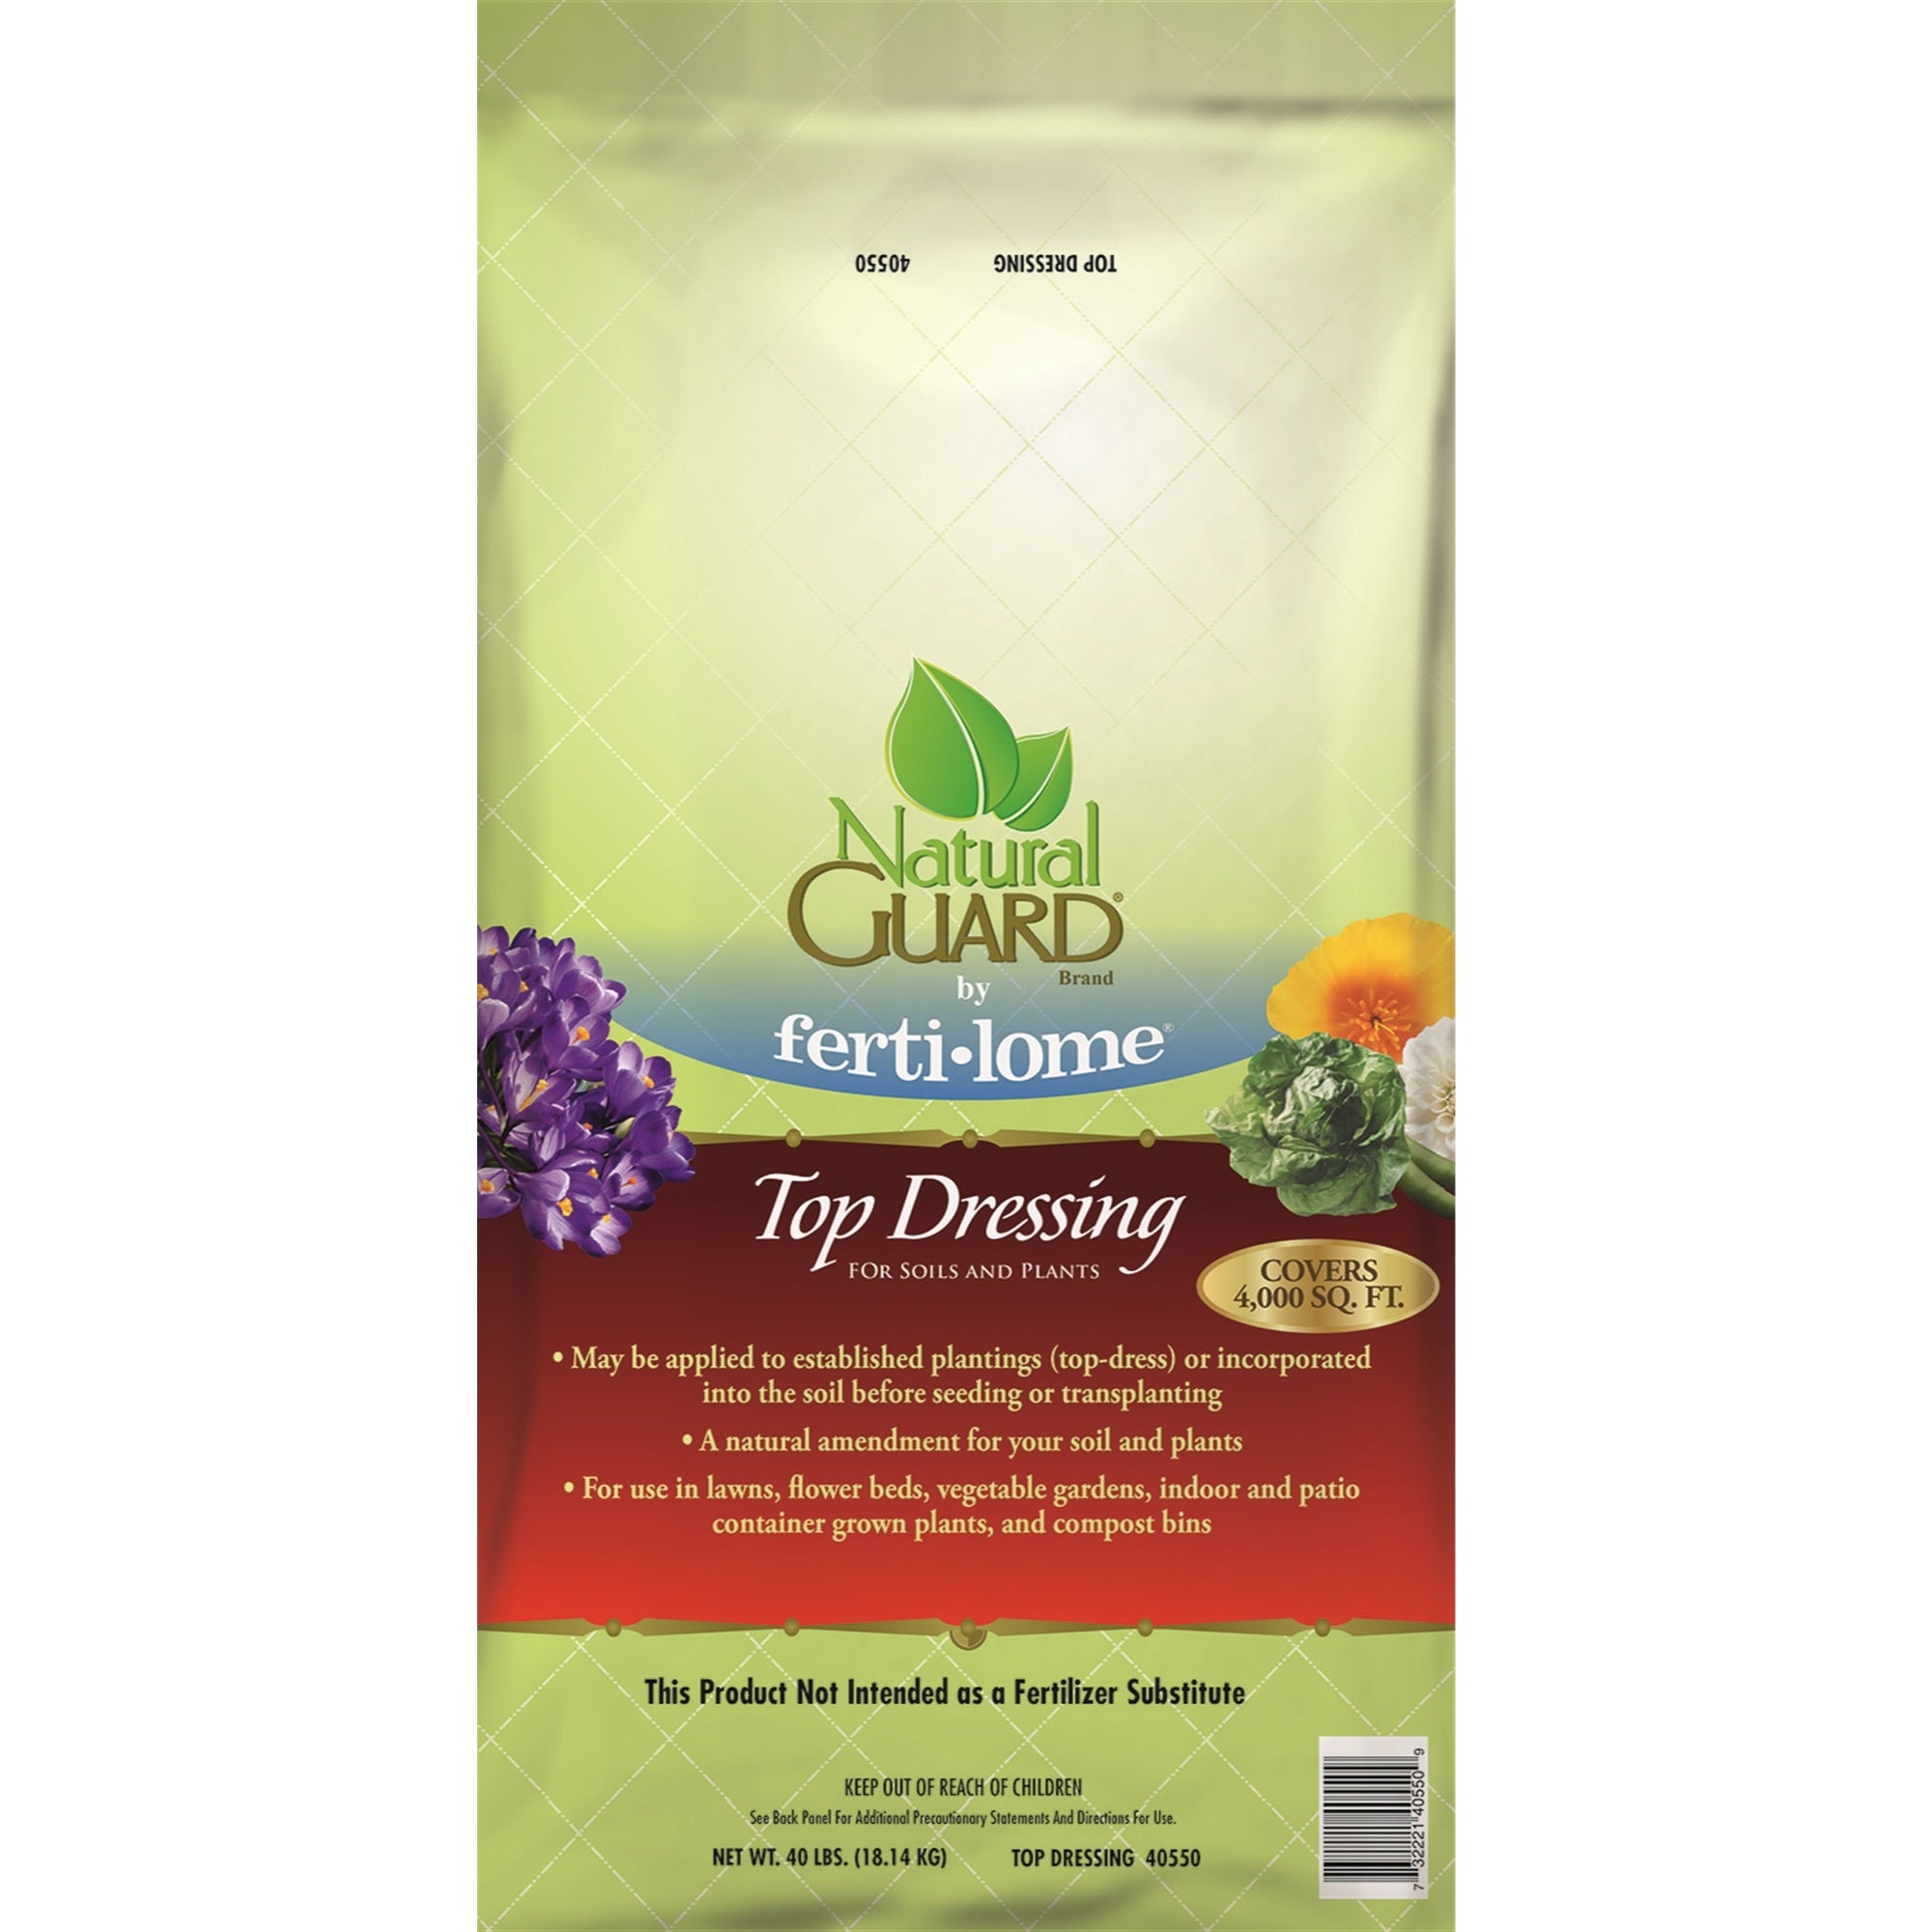 Natural Guard Top Dressing for Soils and Plants, 40 Lb